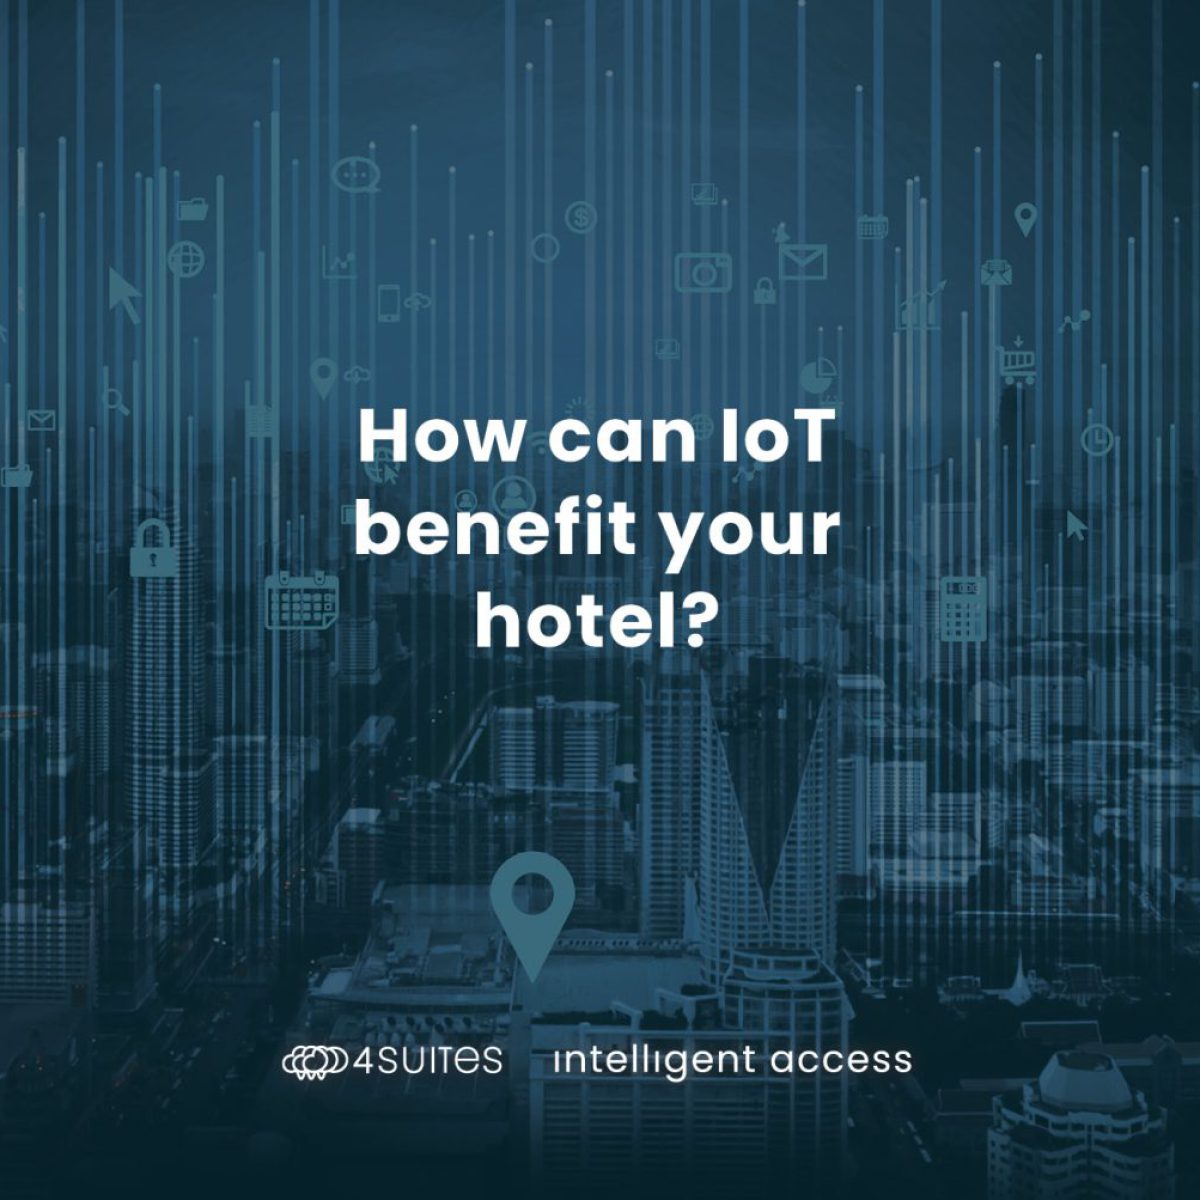 IoT in hotels